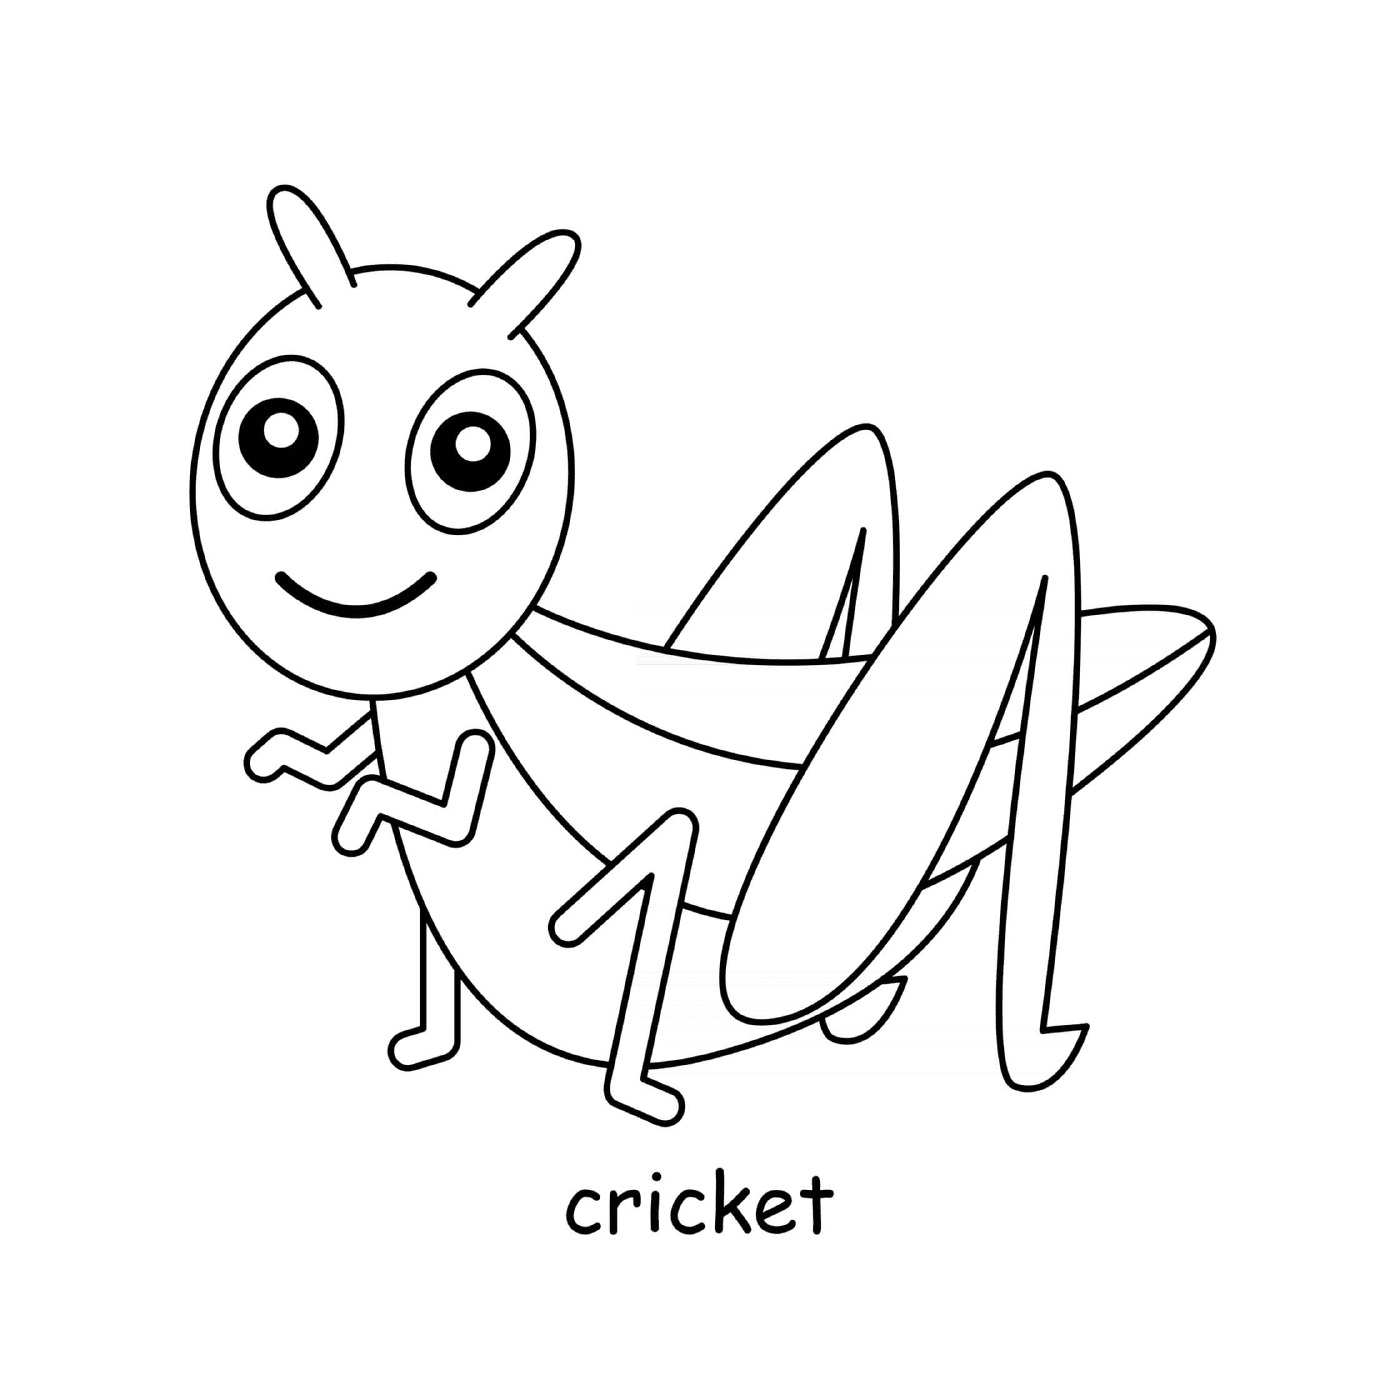  Insect cricket 